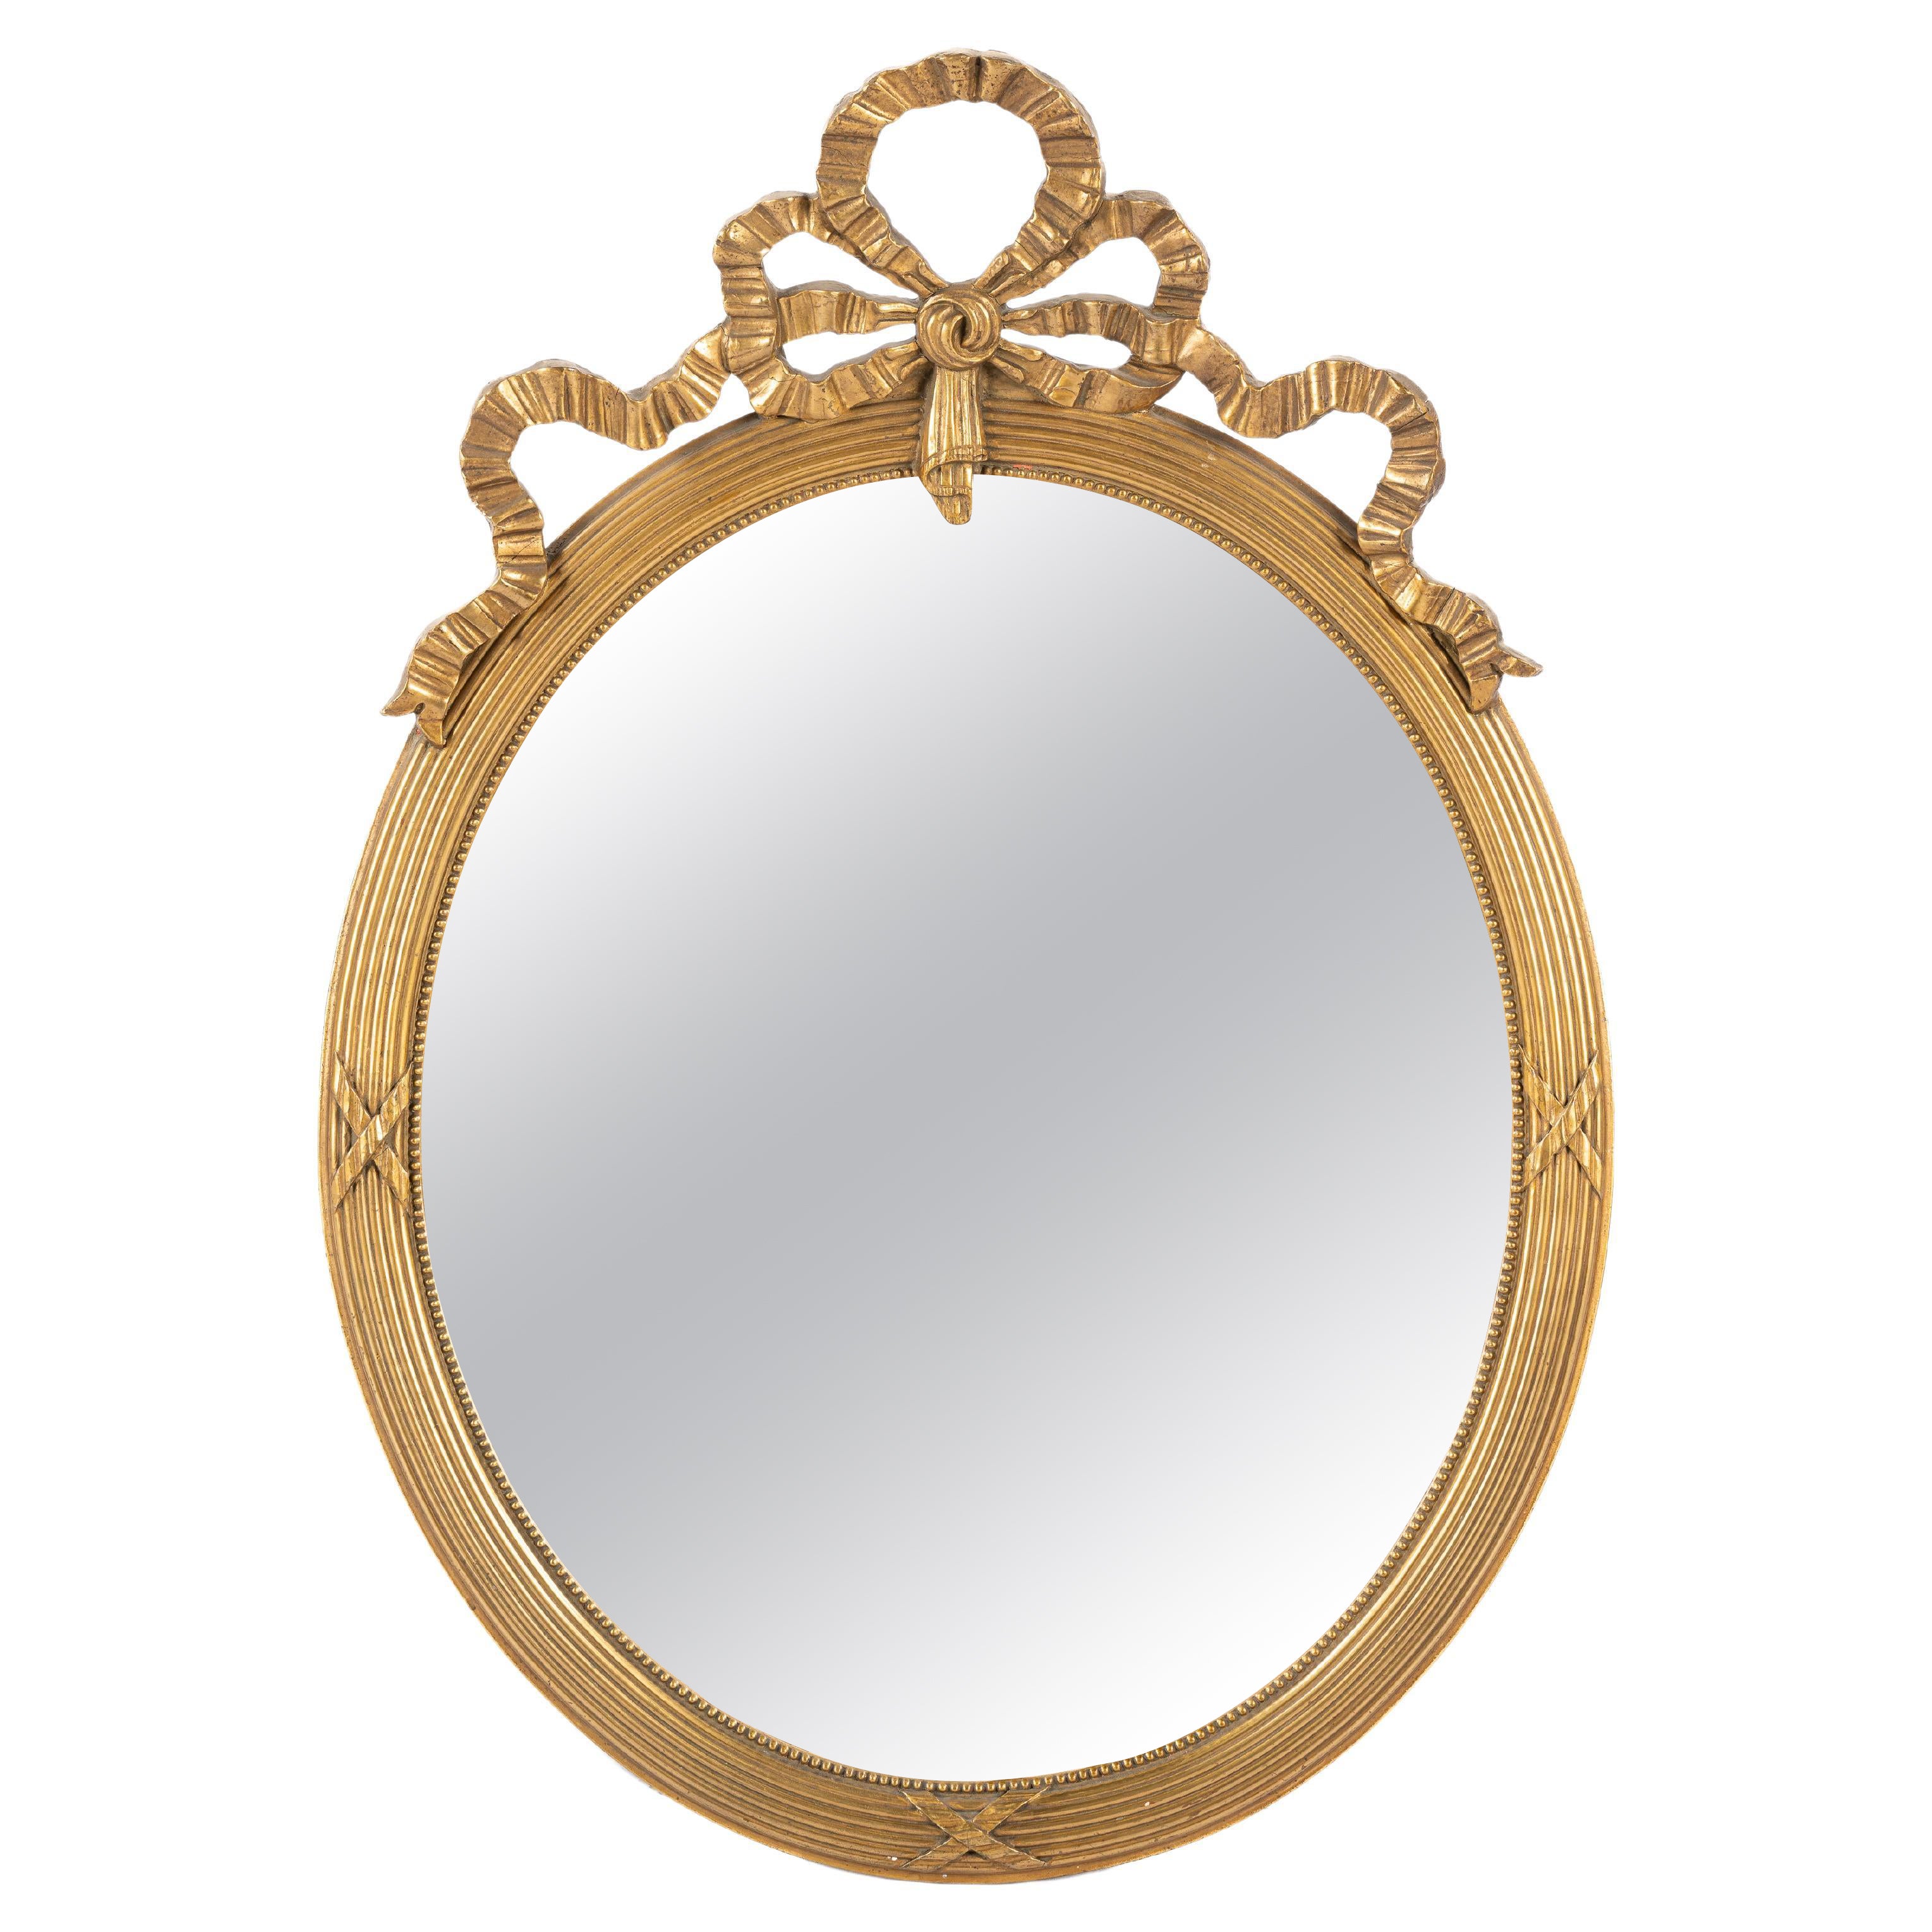 Antique early 20th-century French gold gilt Louis seize or Empire oval mirror  For Sale